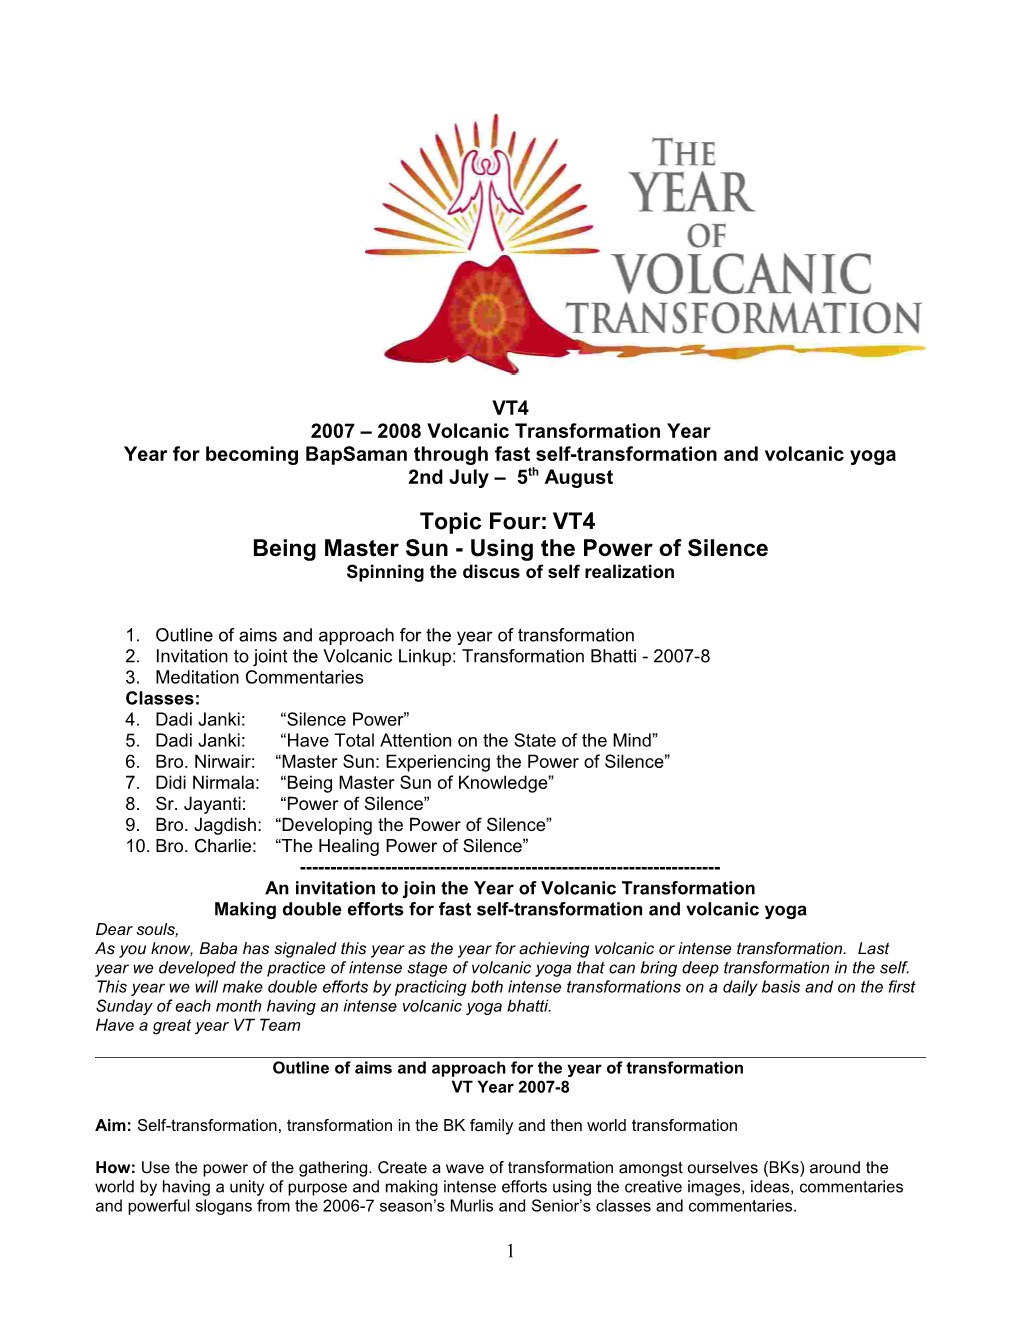 Year for Becoming Bapsaman Through Fast Self-Transformation and Volcanic Yoga